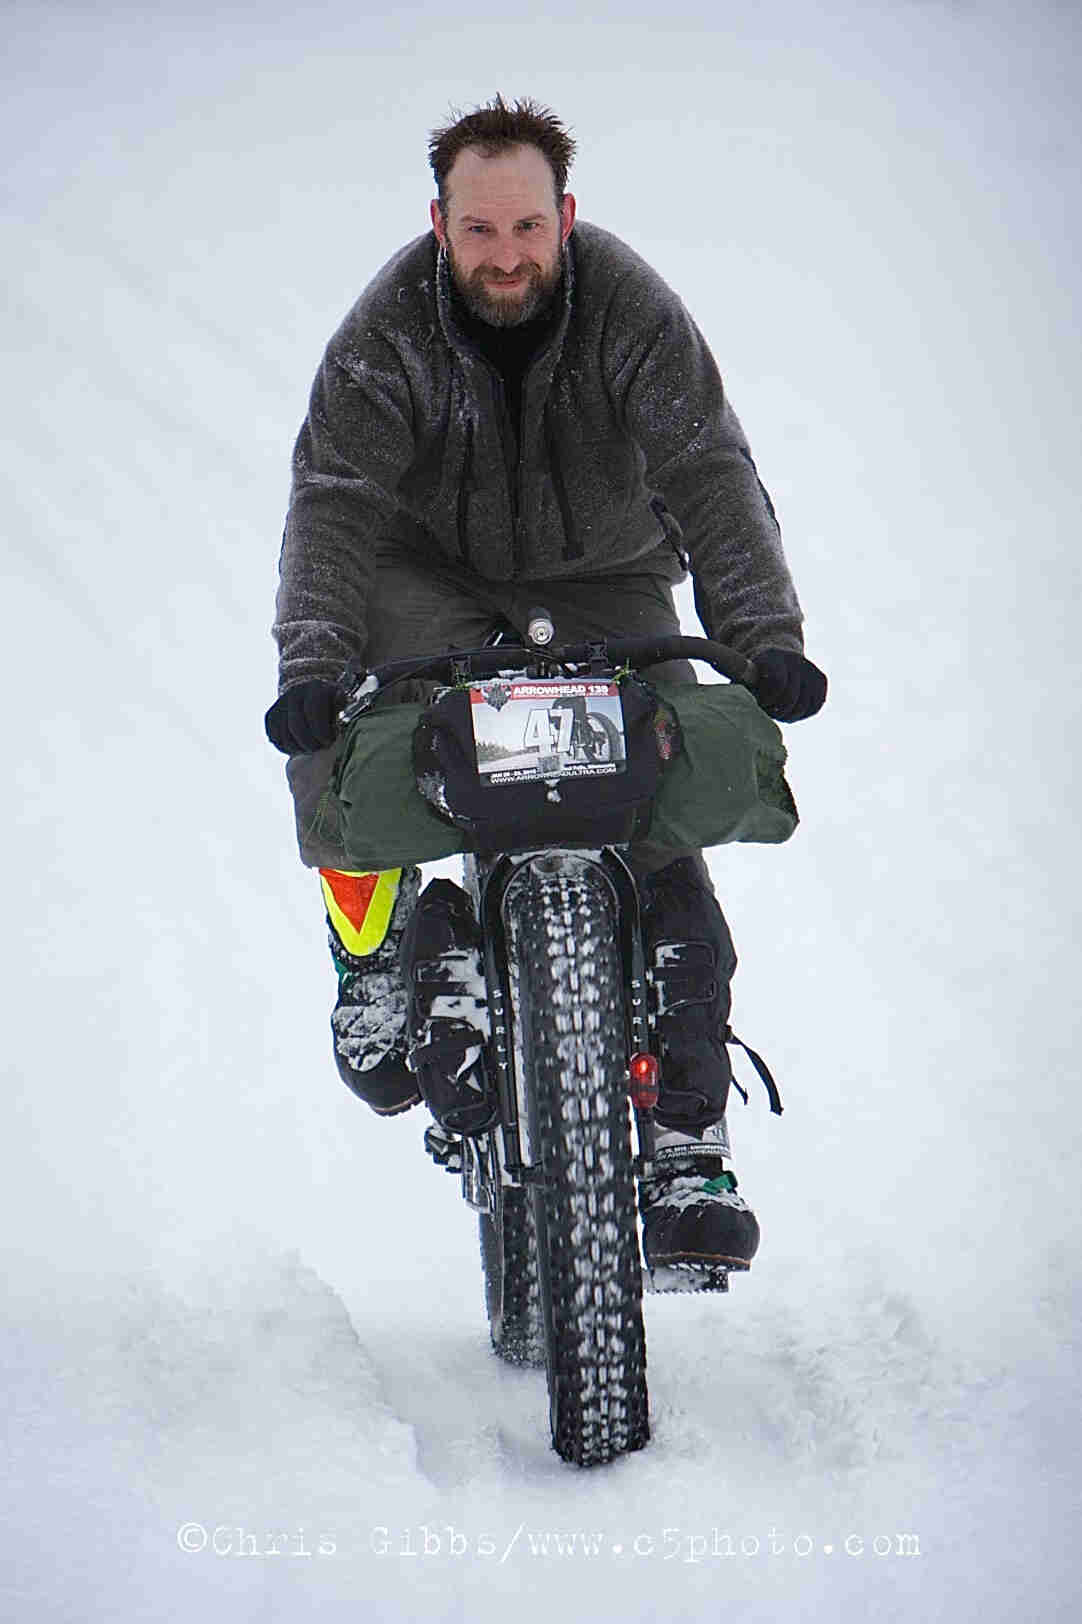 Head on view of a cyclist, wear winter attire, riding a Surly fat bike loaded with gear, on a trail surrounded by snow